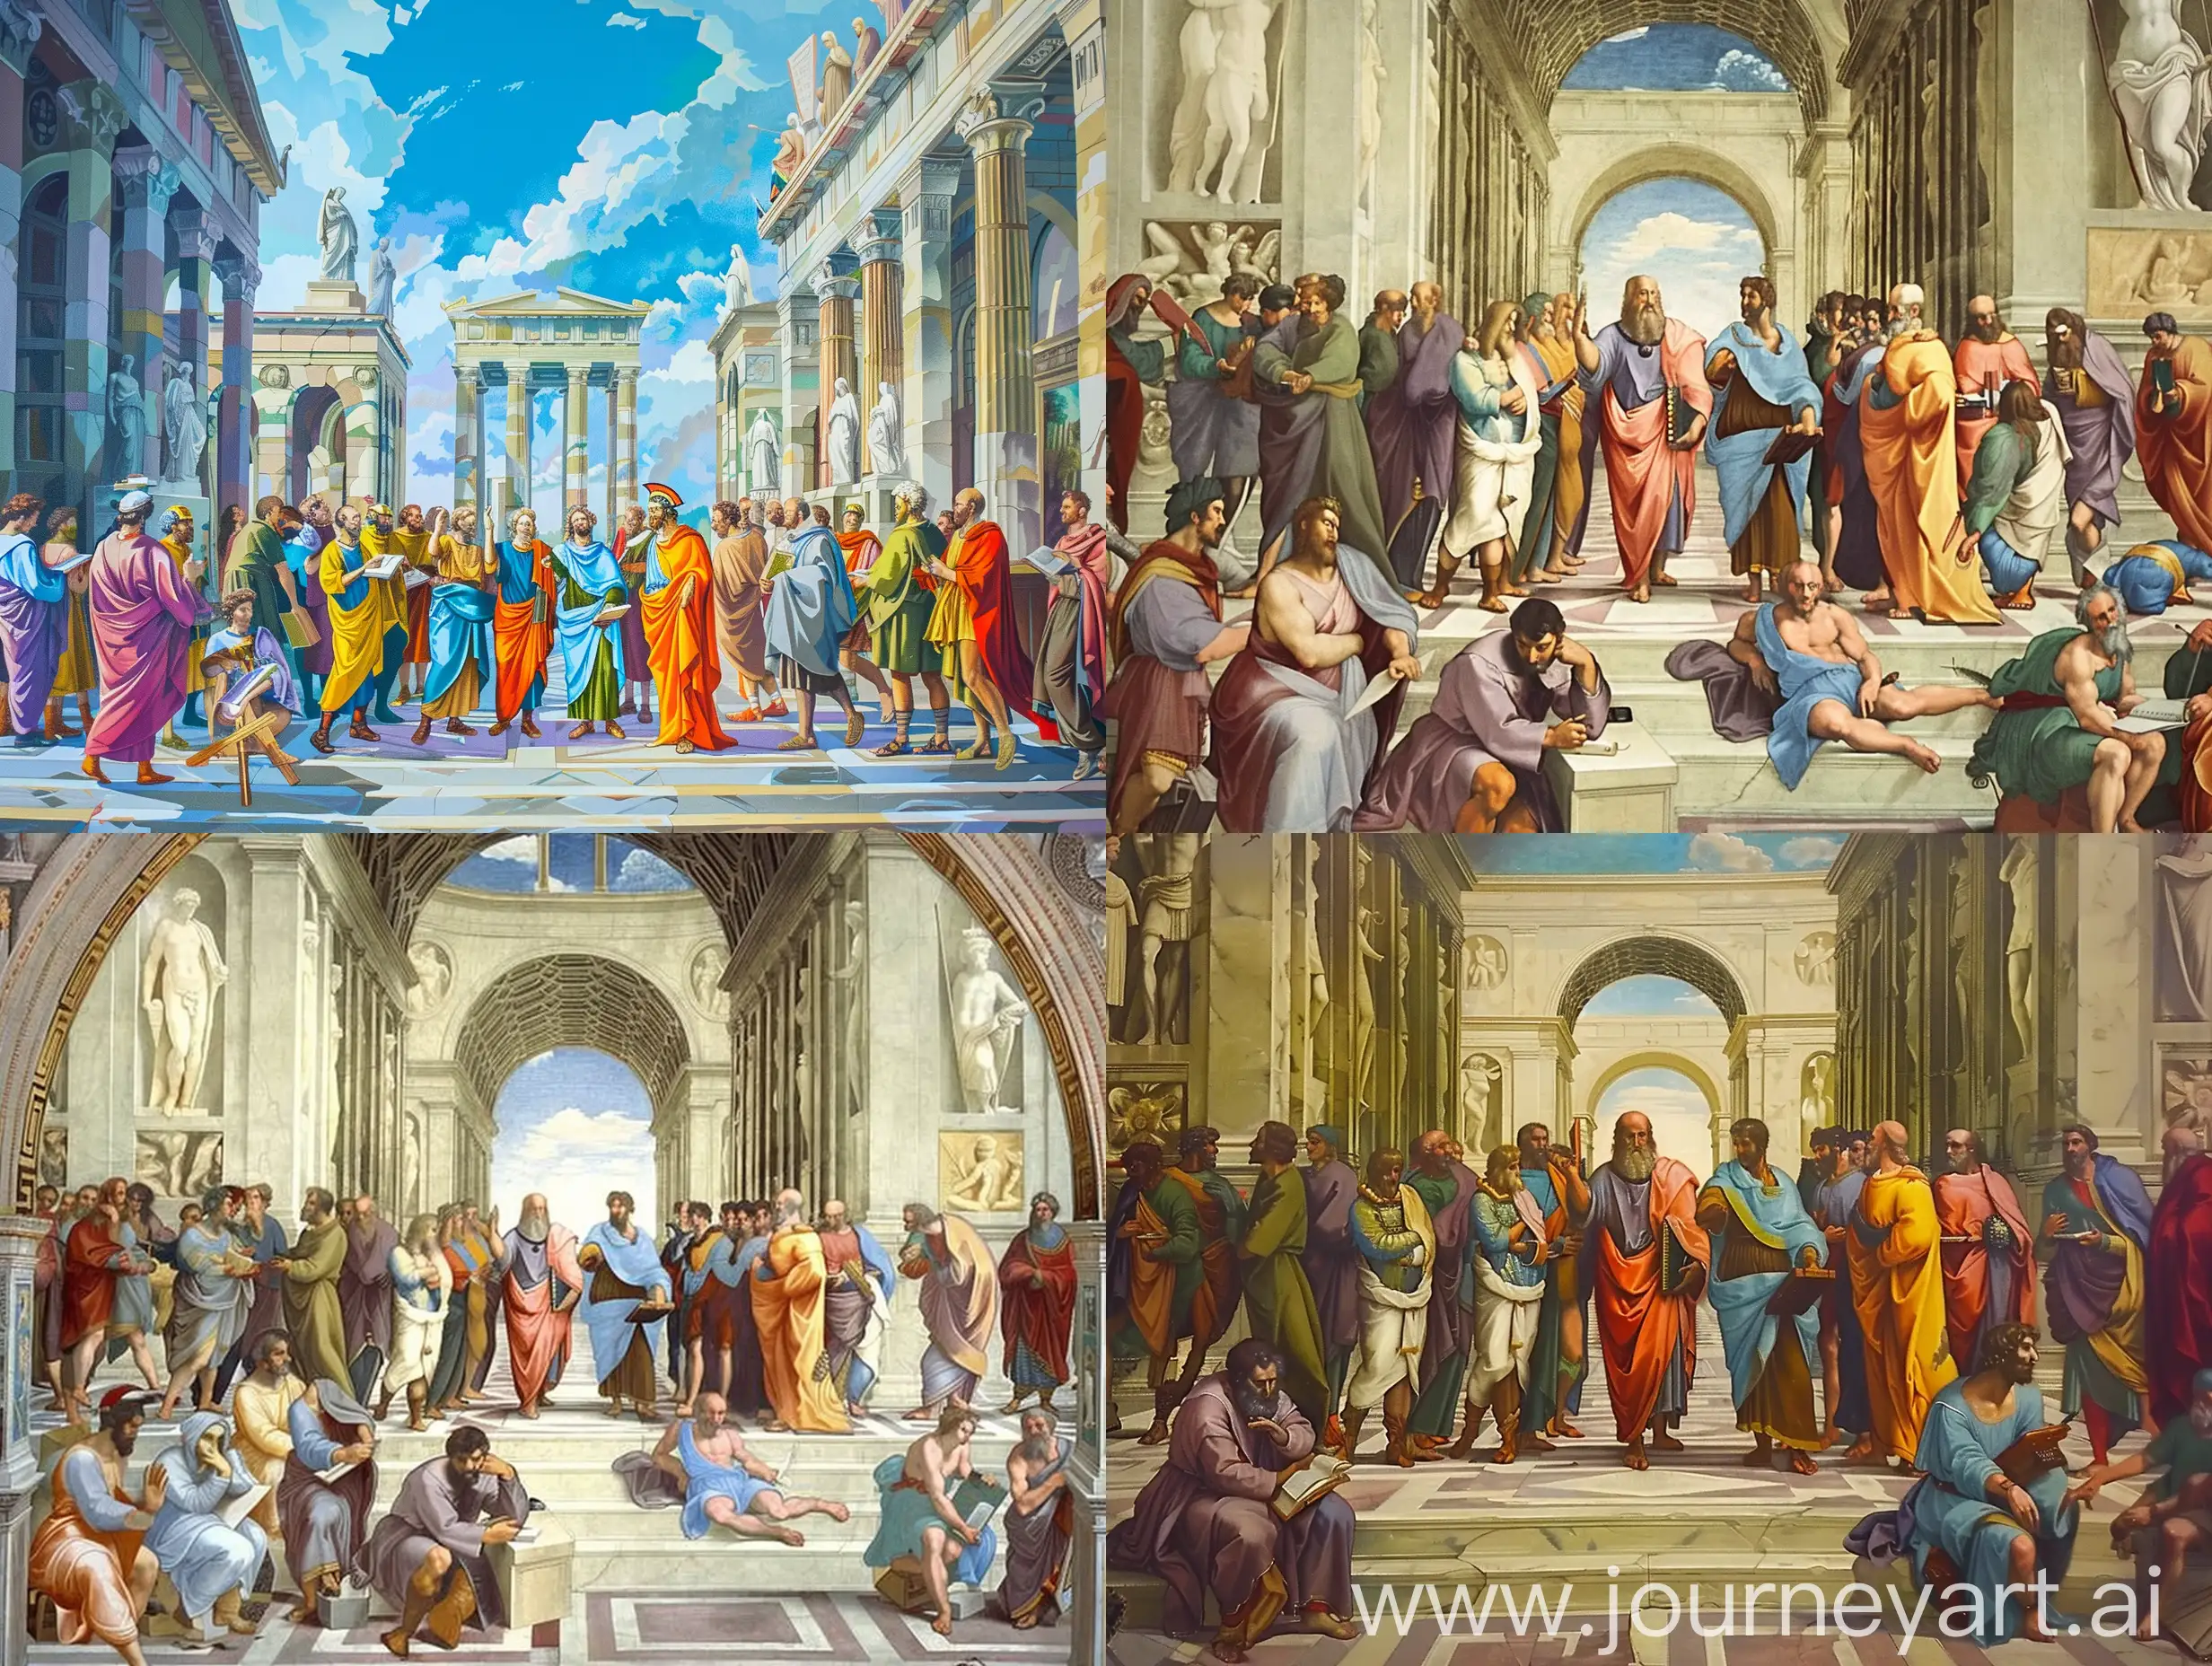 Oil painting which Capture the essence of the Renaissance masterpiece 'The School of Athens' by Raphael in your painting. Depict a gathering of ancient Greek philosophers and scientists engaged in deep discussions in a grand architectural setting. Emphasize the harmony between science, philosophy, and art through a symphony of color, form, and perspective. Include diverse figures in colorful robes, with some writing, discussing, or contemplating. Incorporate classical architectural elements, statues of gods, and a clear vanishing point to add depth to the scene. Let the painting reflect the intellectual achievements and philosophical beliefs of antiquity and the Renaissance era --c 3